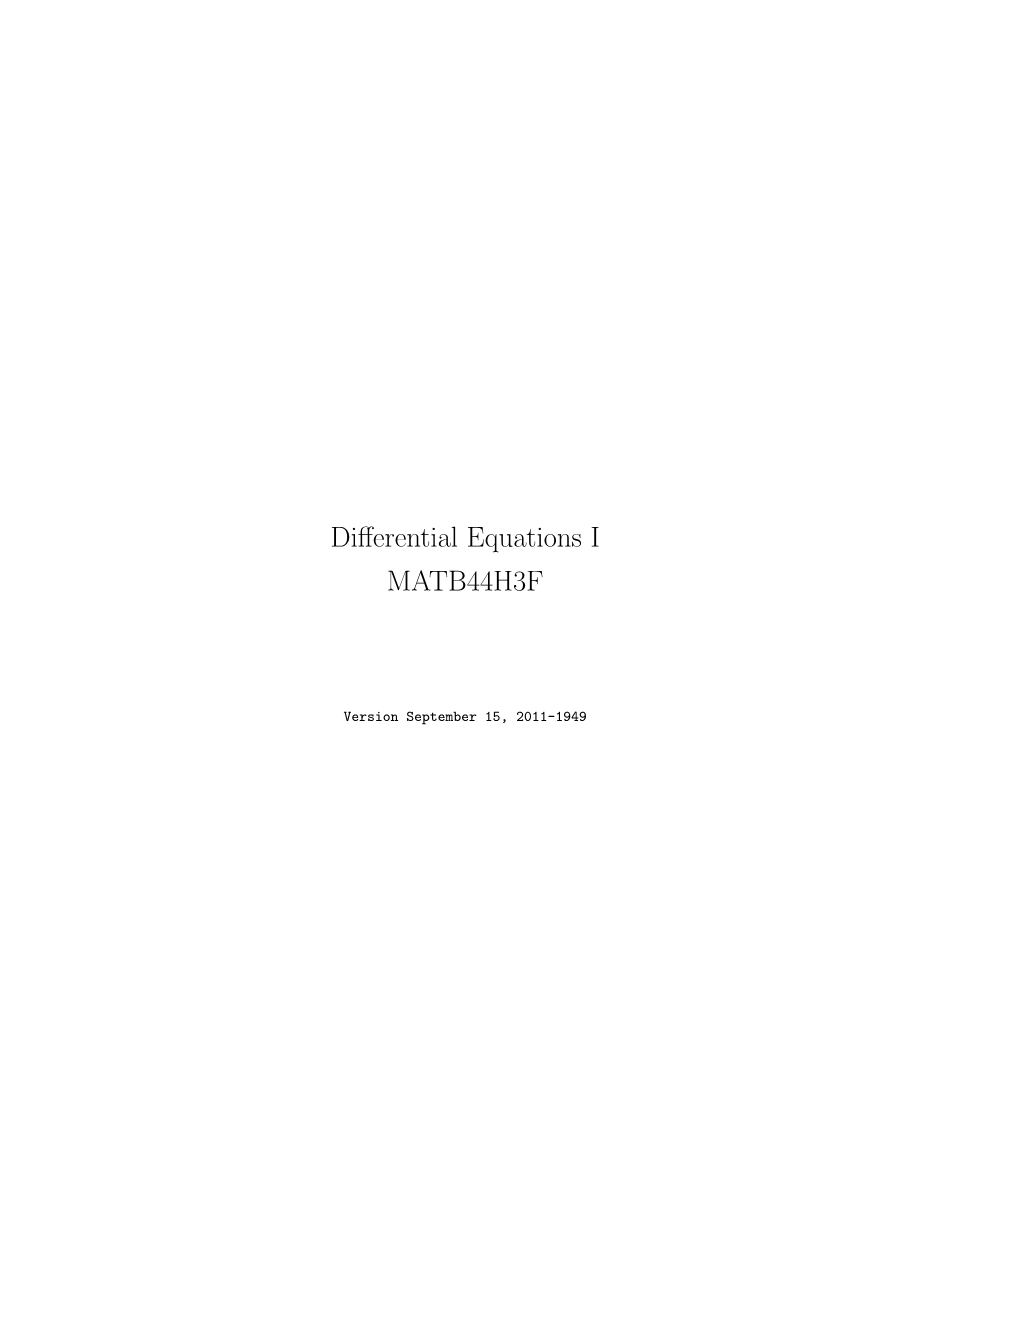 DIFFERENTIAL EQUATIONS Involves Looking for Solutions of the Form Y = Eλu = (Eu)Λ and ﬁnding Λ